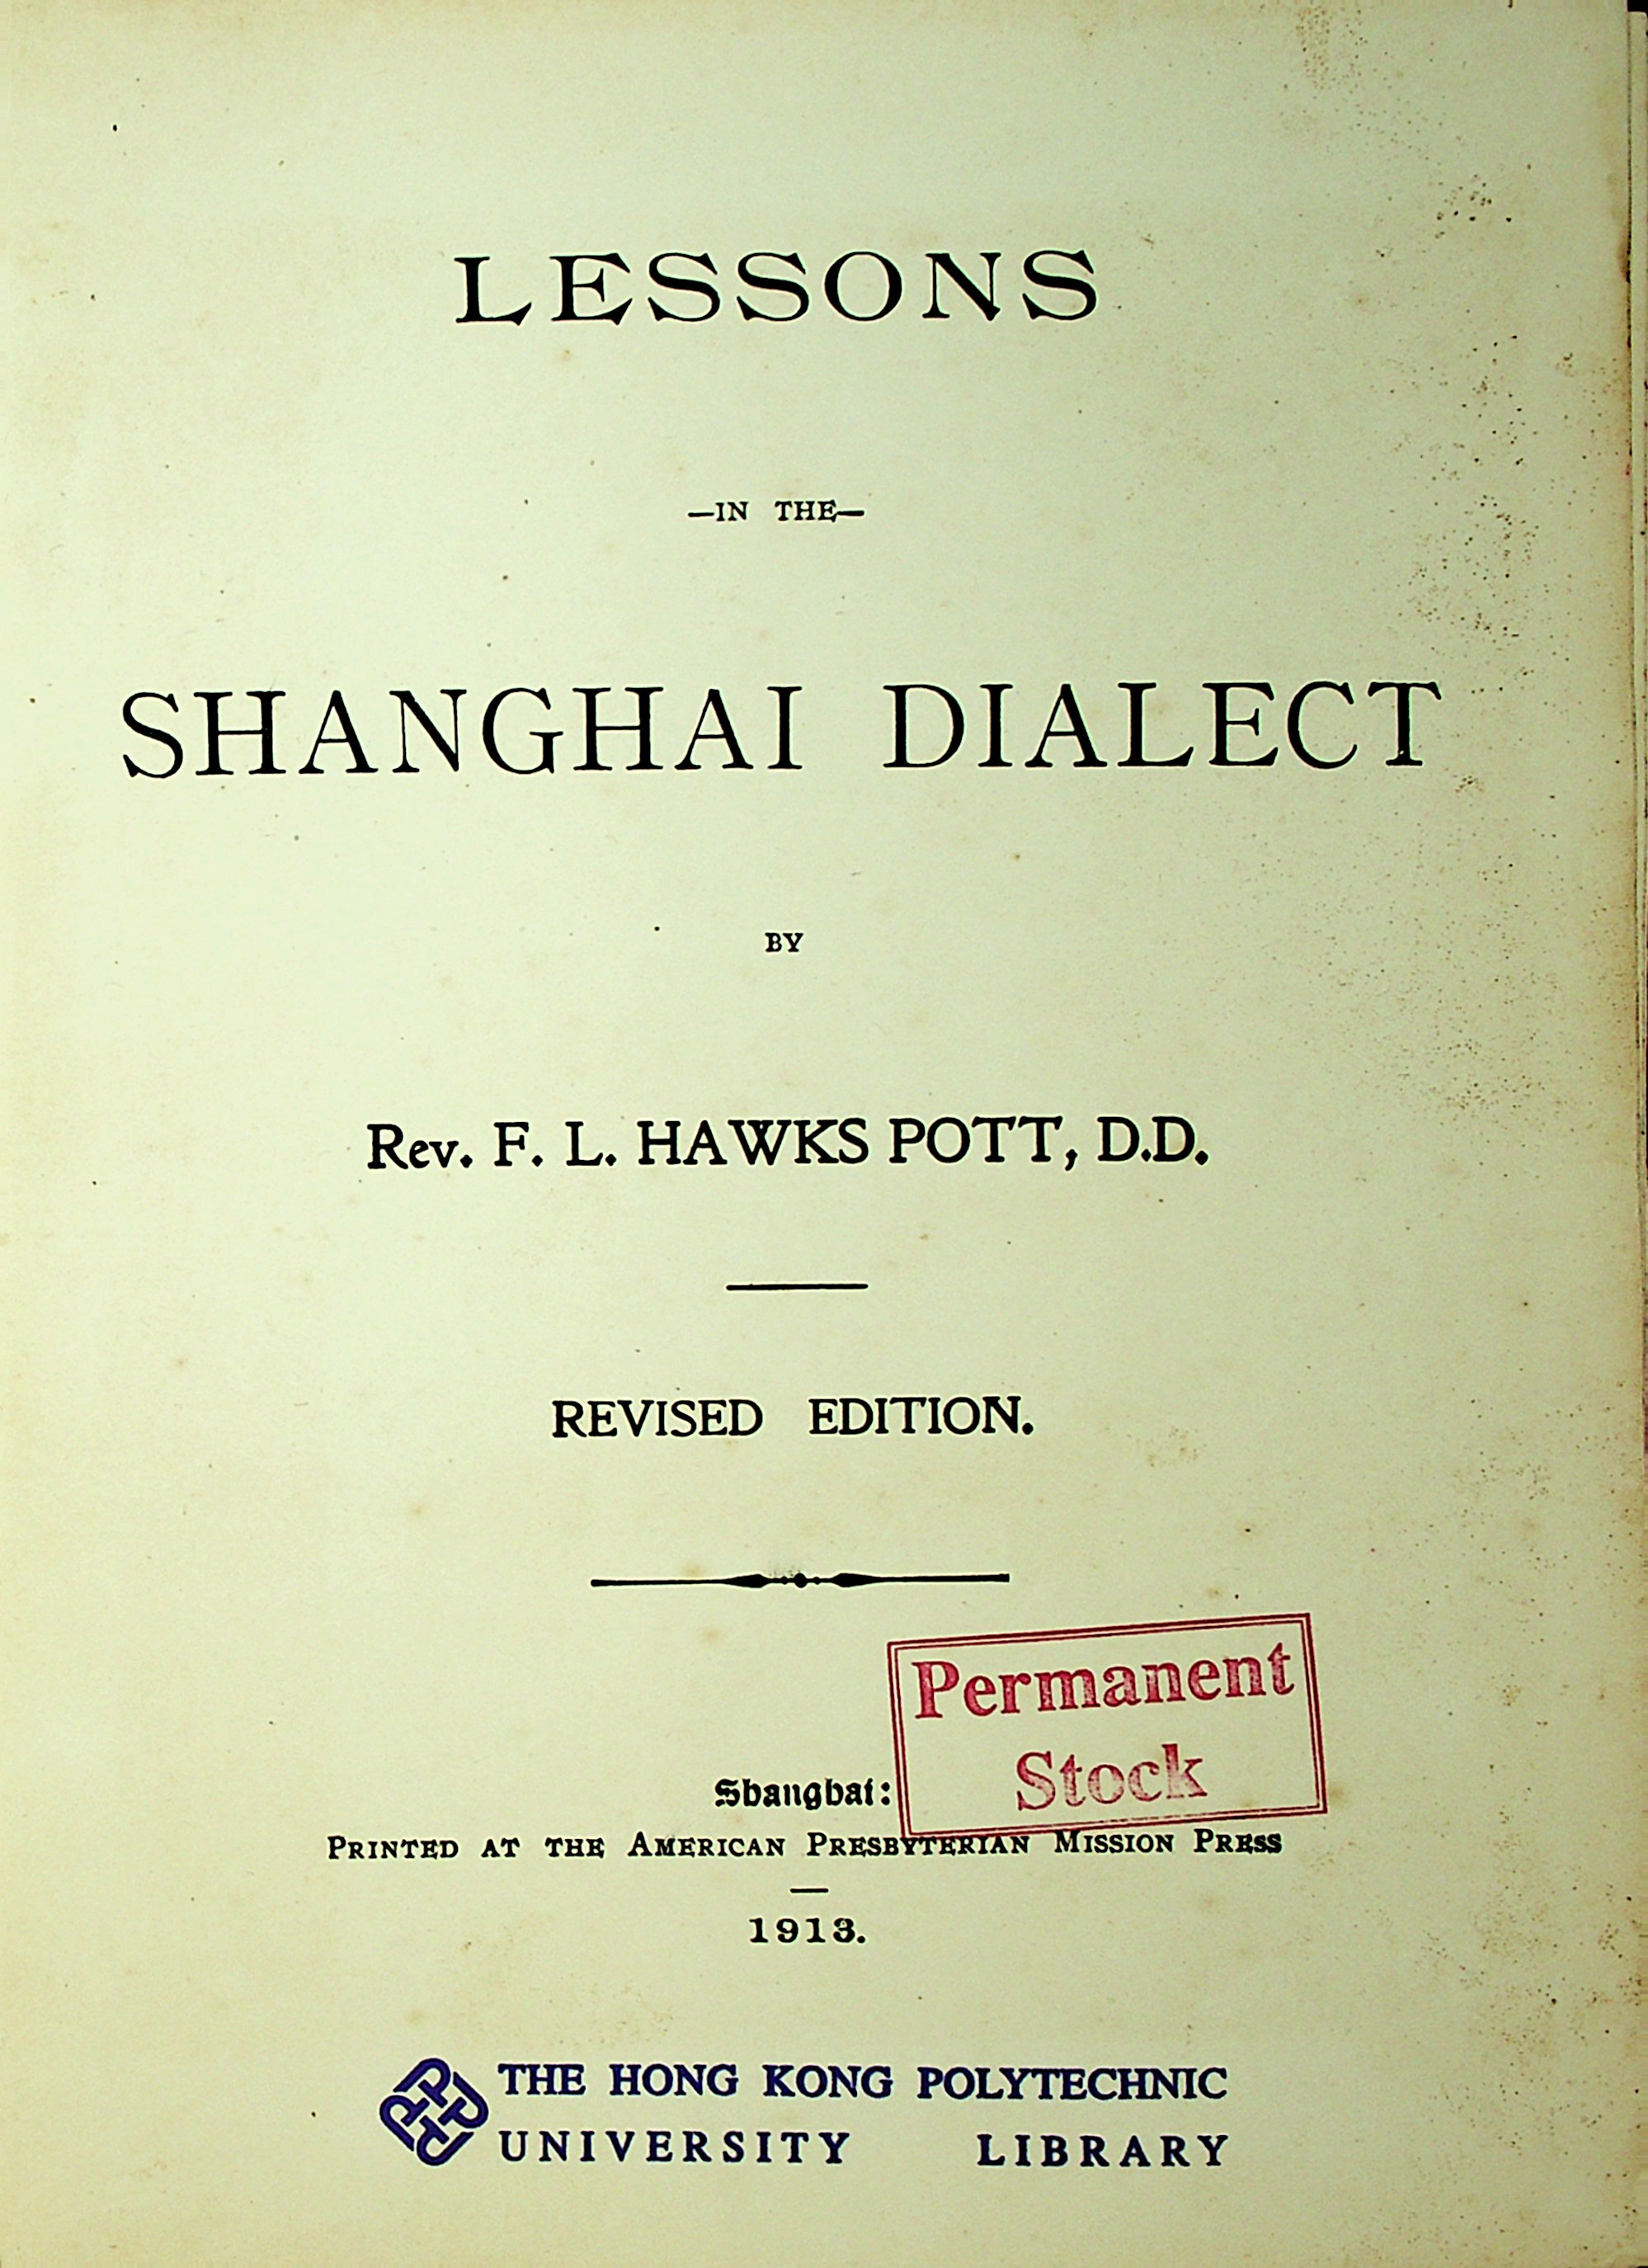 Lessons in the Shanghai dialect